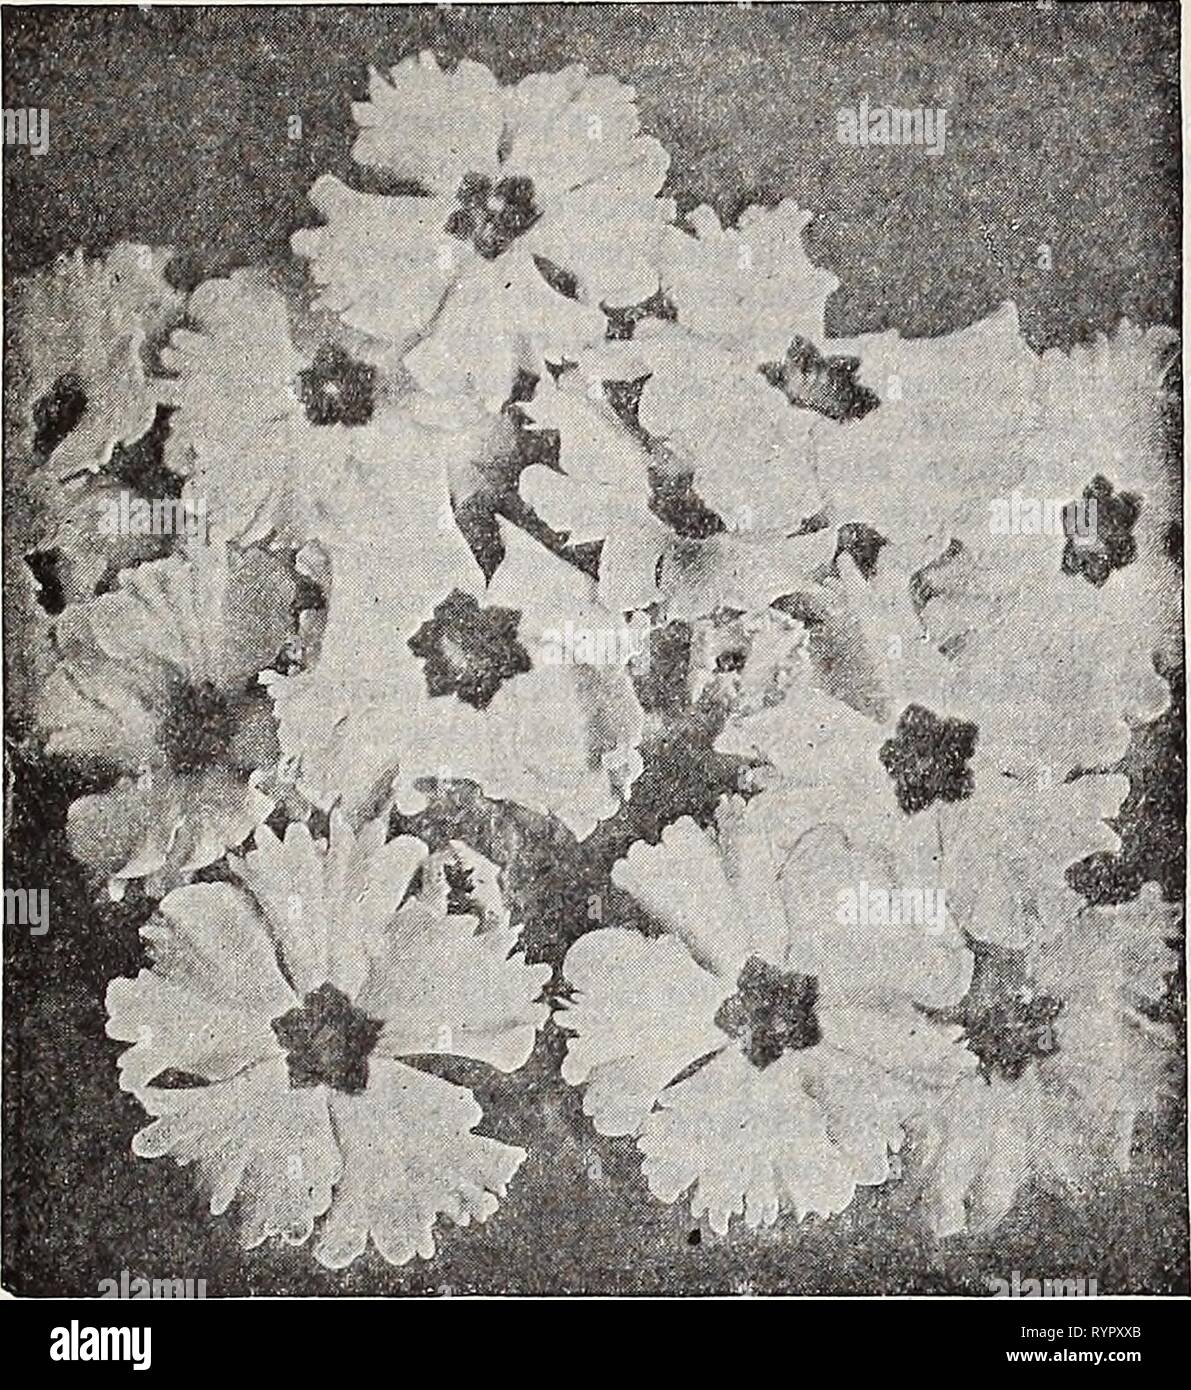 Dreer's midsummer list 1932 (1932) Dreer's midsummer list 1932 . dreersmidsummerl1932henr Year: 1932  DREER'S FLOWER SEEDS FOR SUMMER SOWING 17    : Dreer's 'Peerless' Chinese Primroses Primula (Primrose) The charming and beautiful Chinese Fringed Primrose and Obconica varieties are indispensable for winter or spring decora- tions in the home or conservatory. They are one of the most im- portant winter blooming pot plants. Dreer's 'Peerless' Chinese Primroses PER pkt. 3784 Peerless Blue (True Blue) $0 50 35 35 35 35 3785 -White (Brook's White). Pure white 3787 -Pink (Delicata). Soft pink 3783  Stock Photo